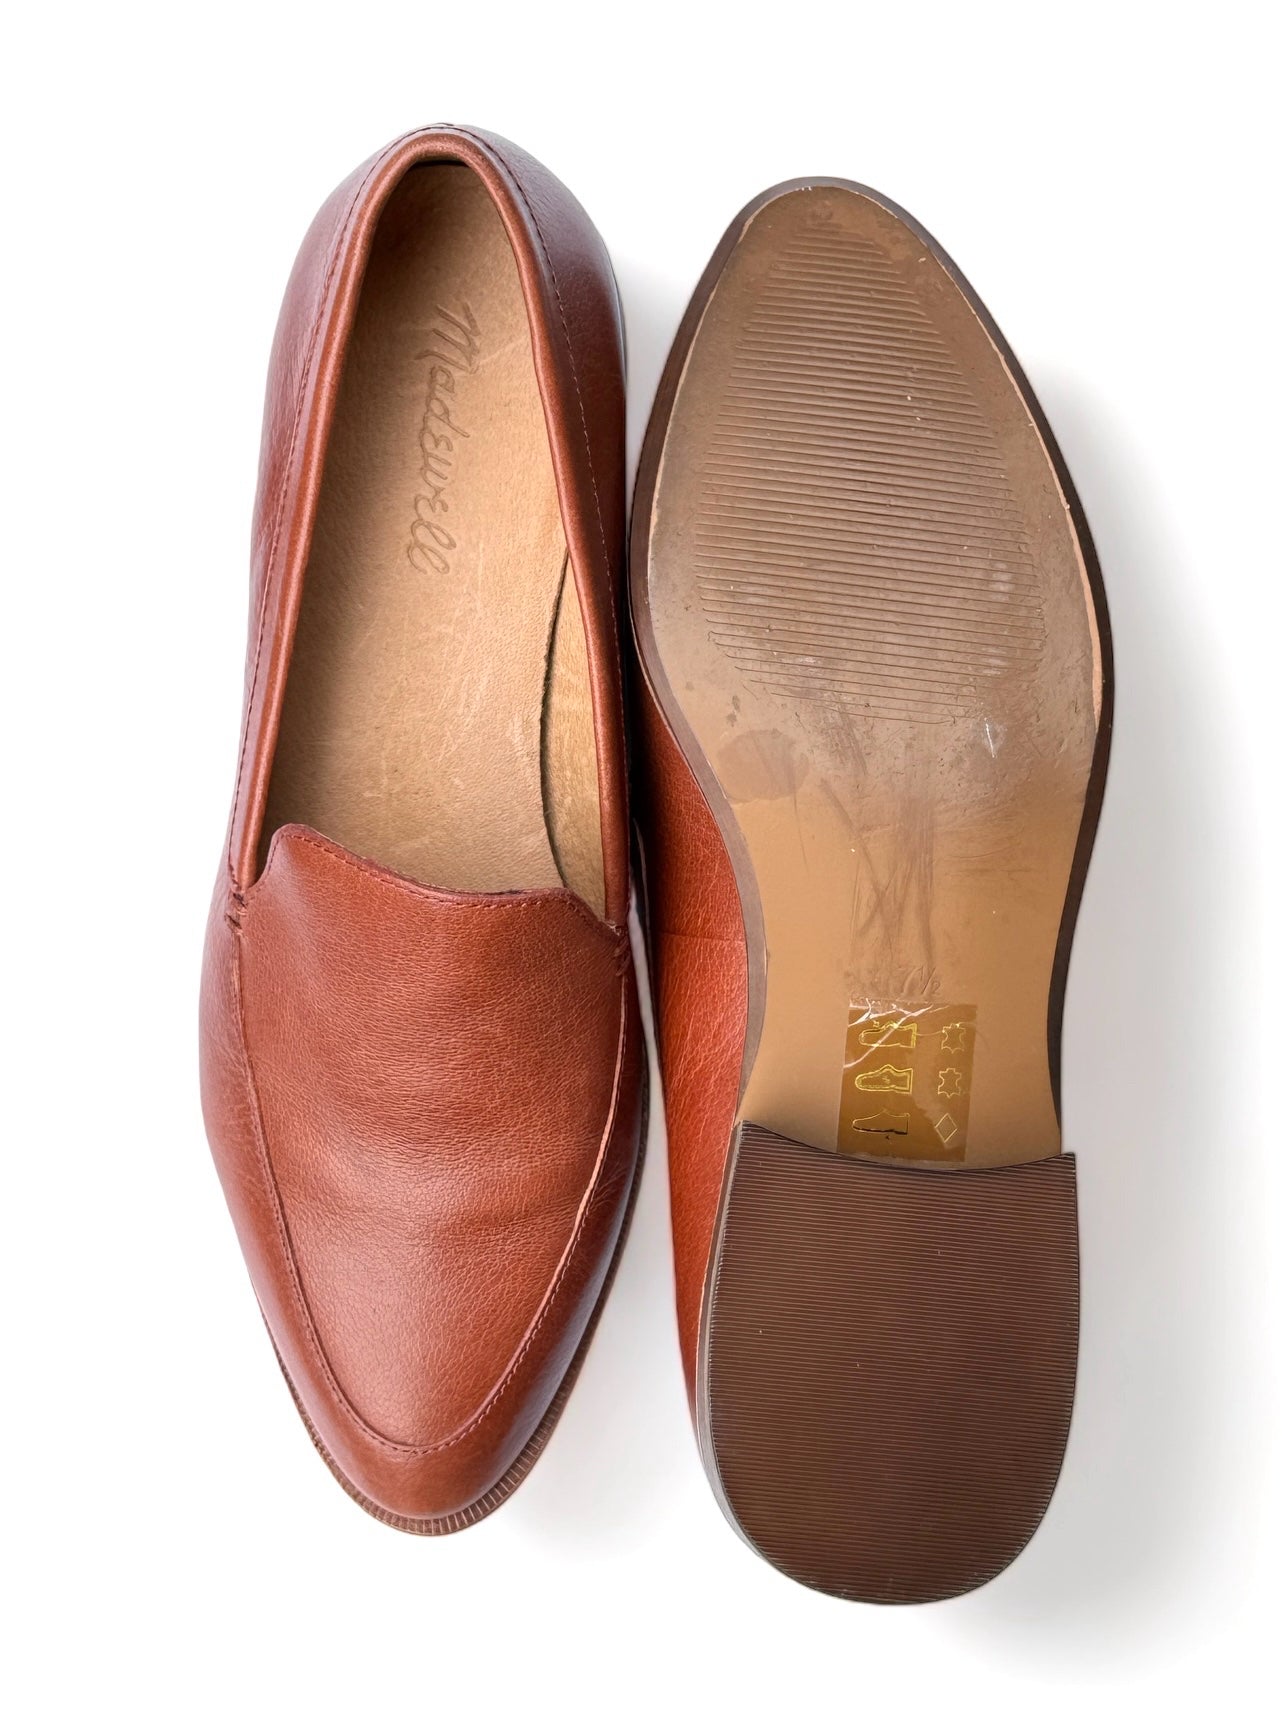 Shoe Size 7.5 Madewell Brown Loafers